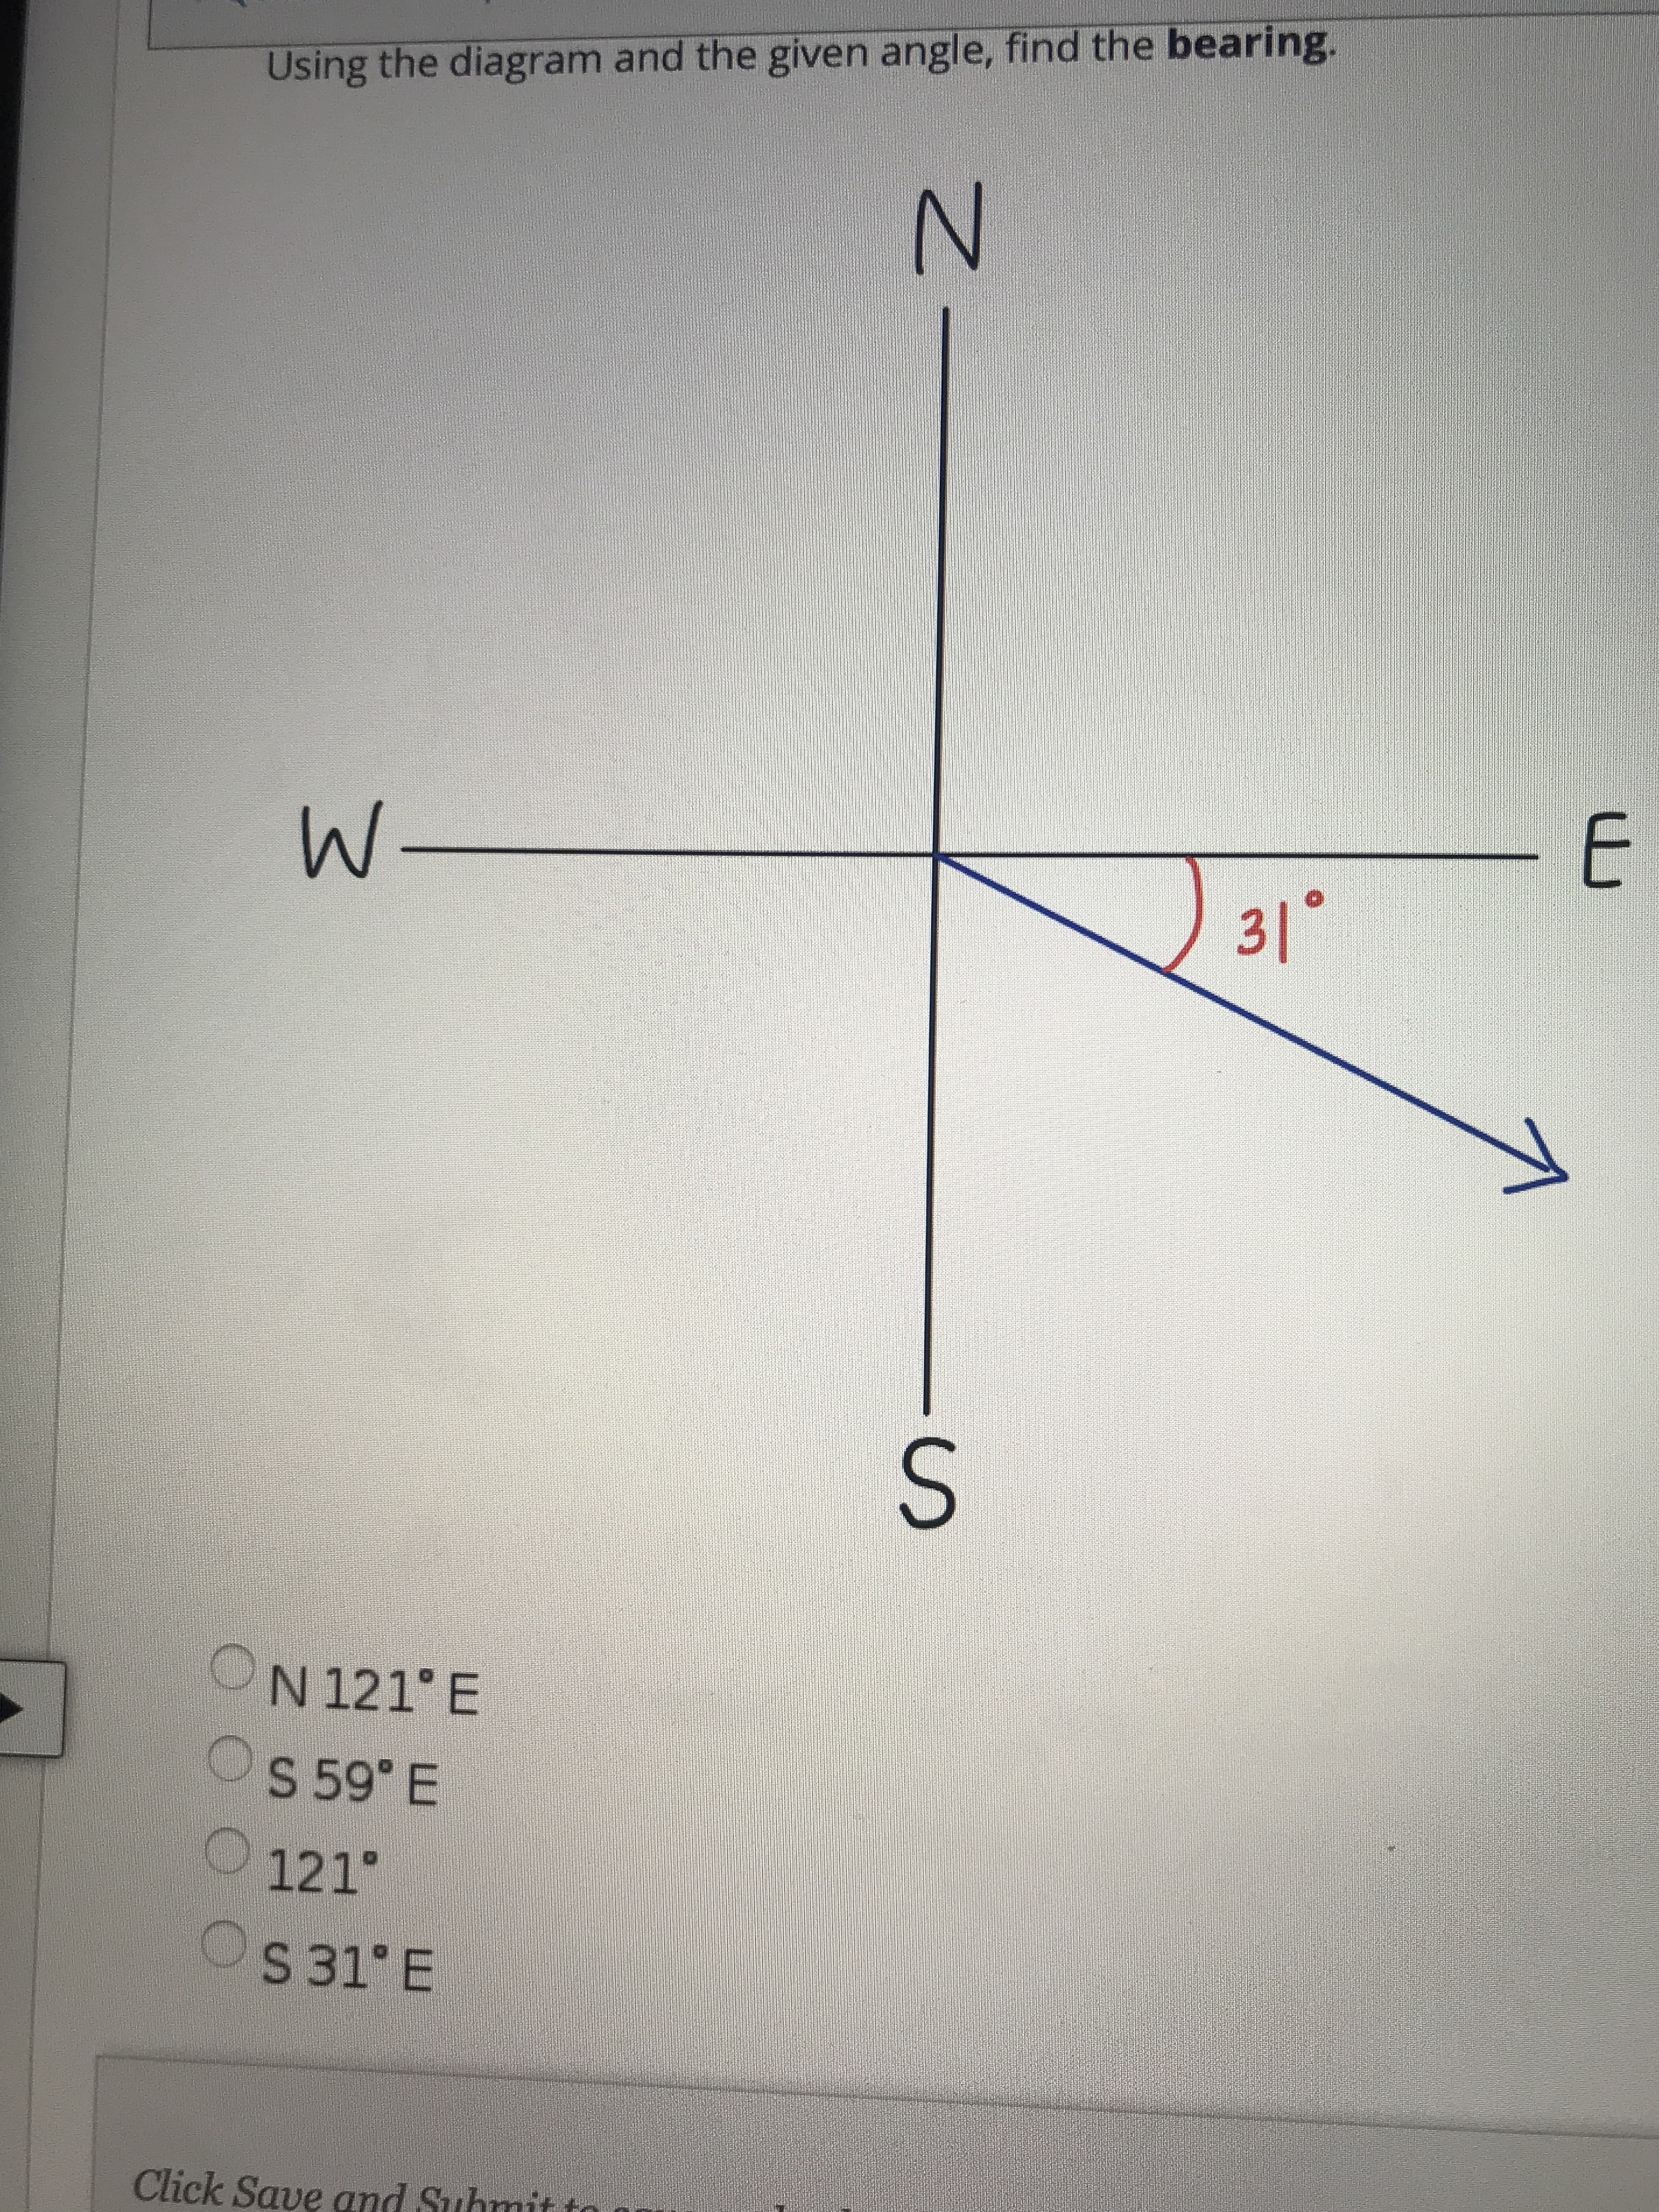 Using the diagram and the given angle, find the bearing.
